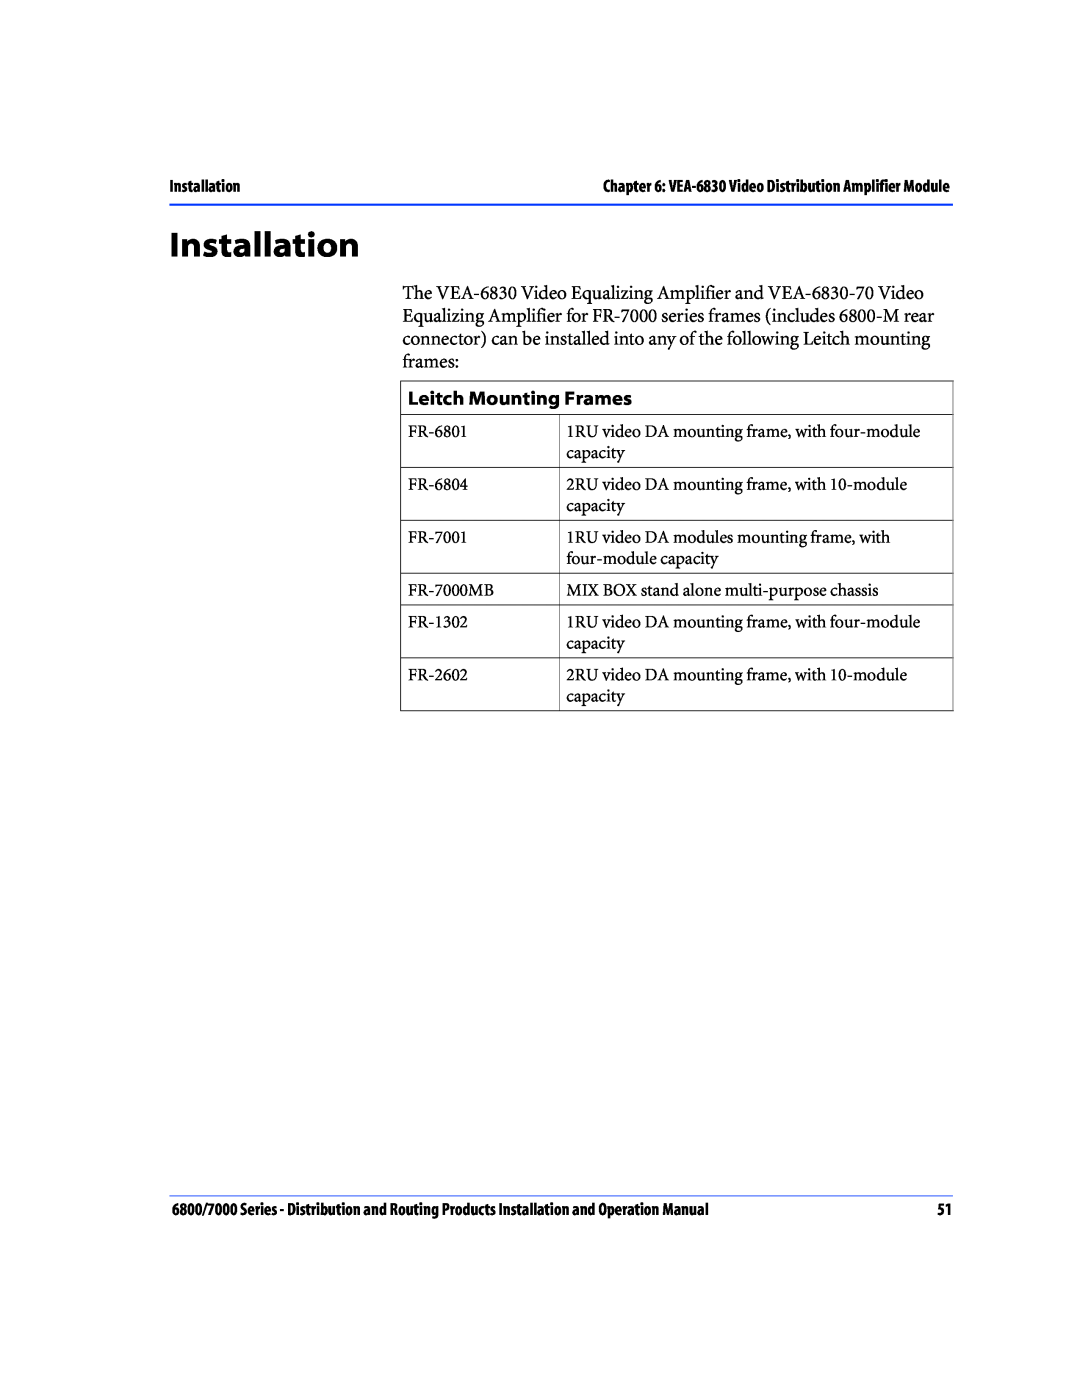 Nokia 6800 Series, 7000 Series operation manual Leitch Mounting Frames, Installation 